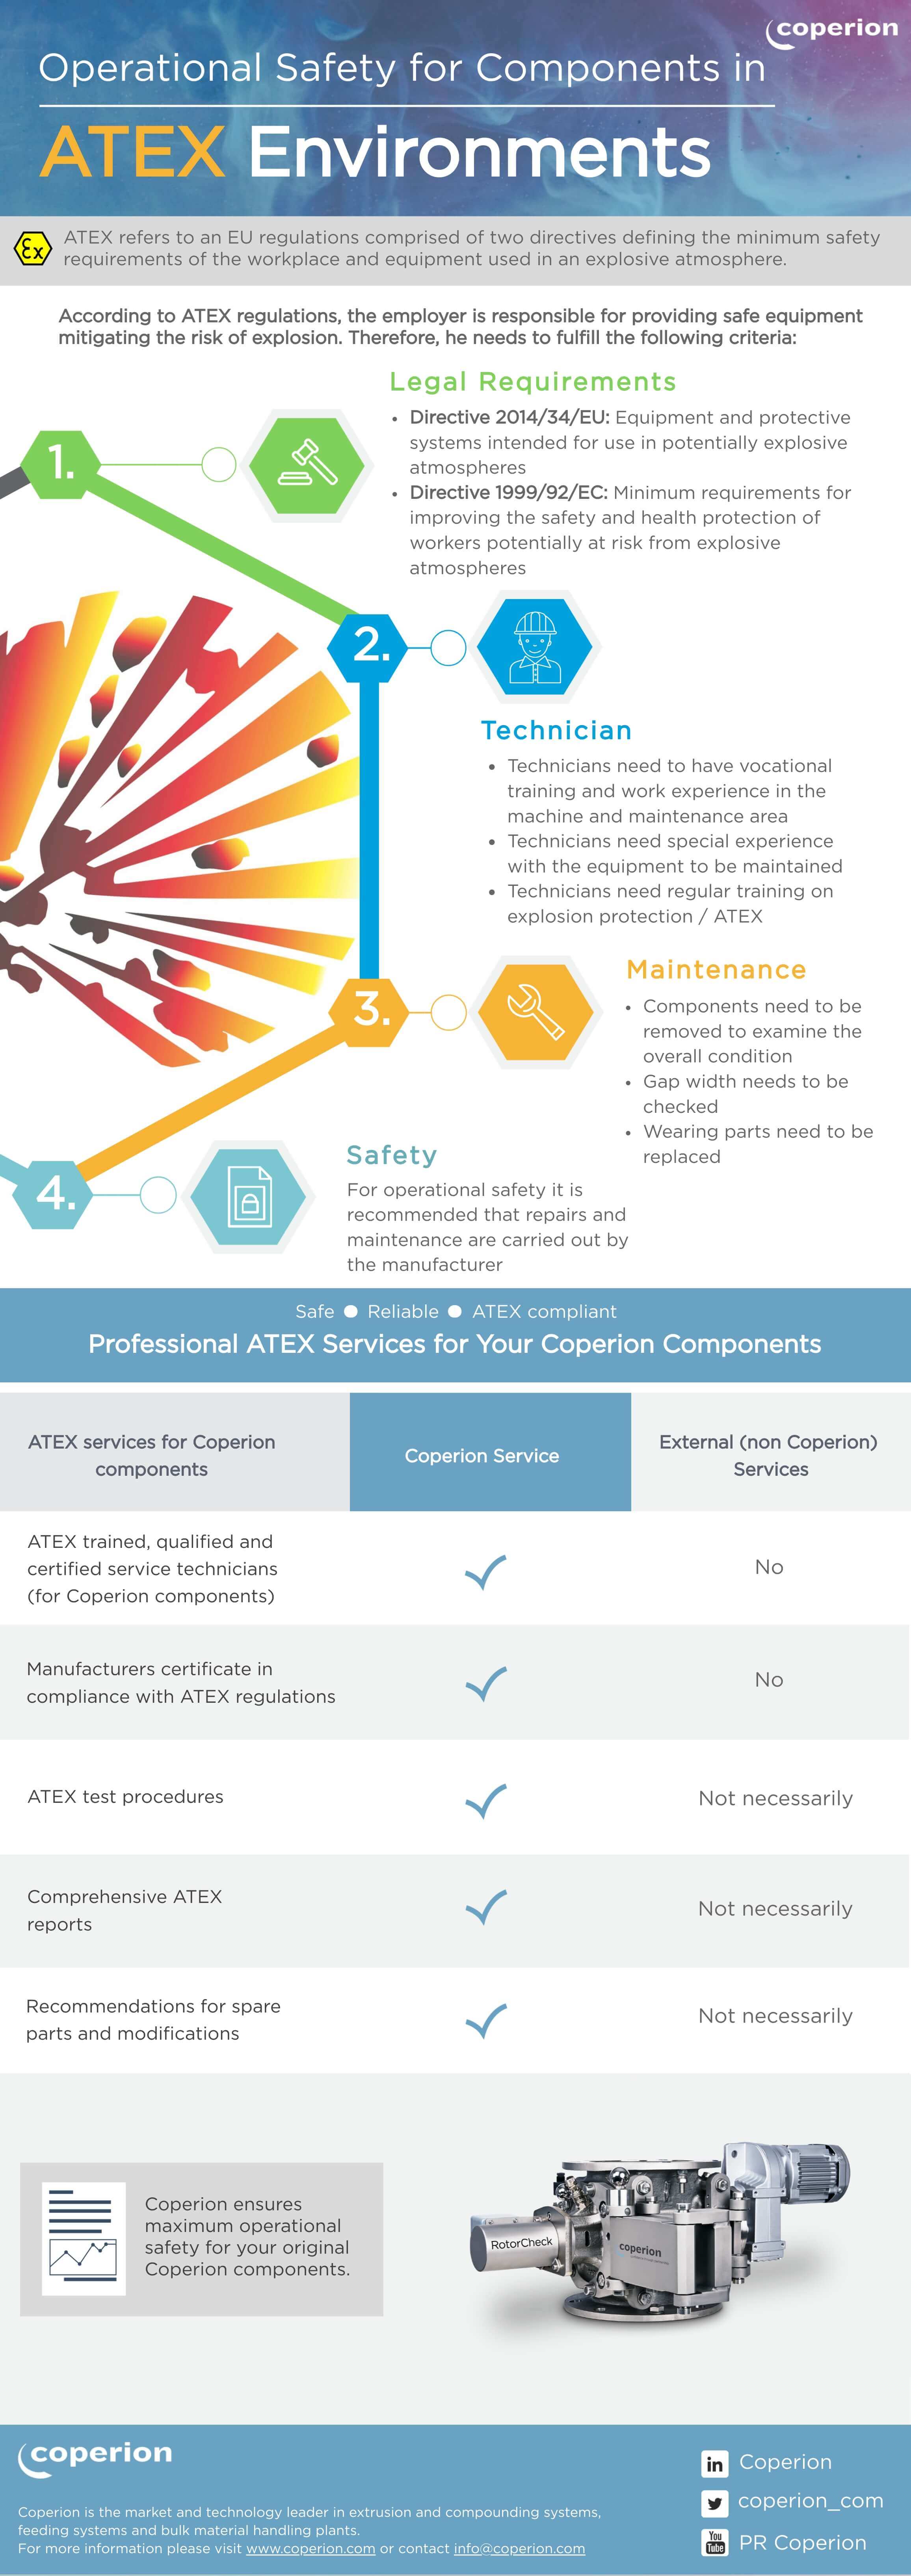 Coperion ATEX environments infographic